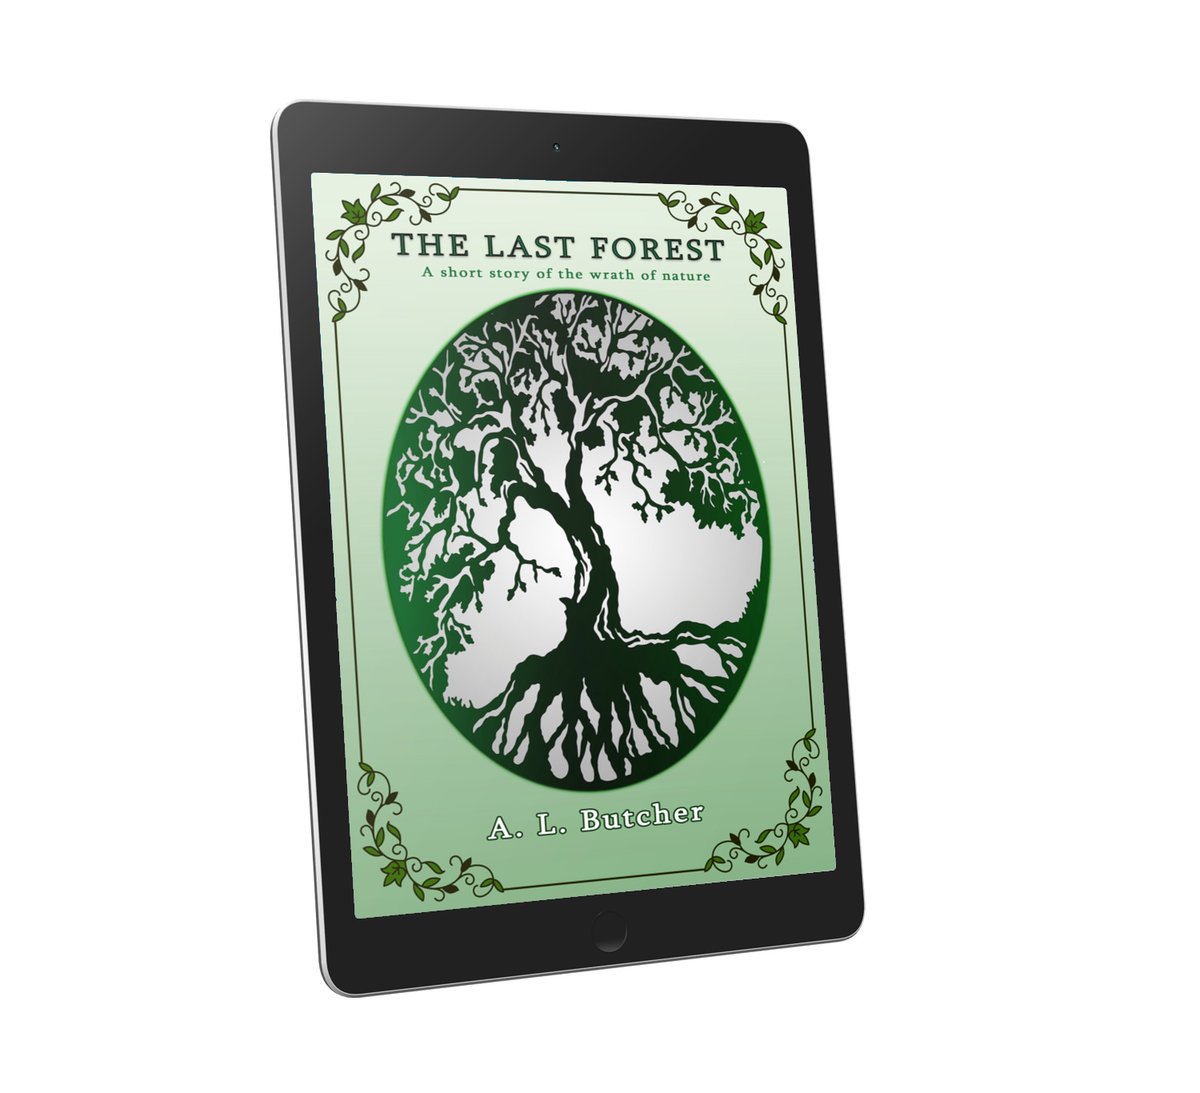 When humans come to fell the Last Forest, they are in for a nasty surprise. A short dark #fantasy tale of the wrath of nature. #Dystopian #Shortfiction #shortstory #environmental #Audiobook #Ebook #IARTG books2read.com/TheLastForest audible.com/pd/B08S46627Q